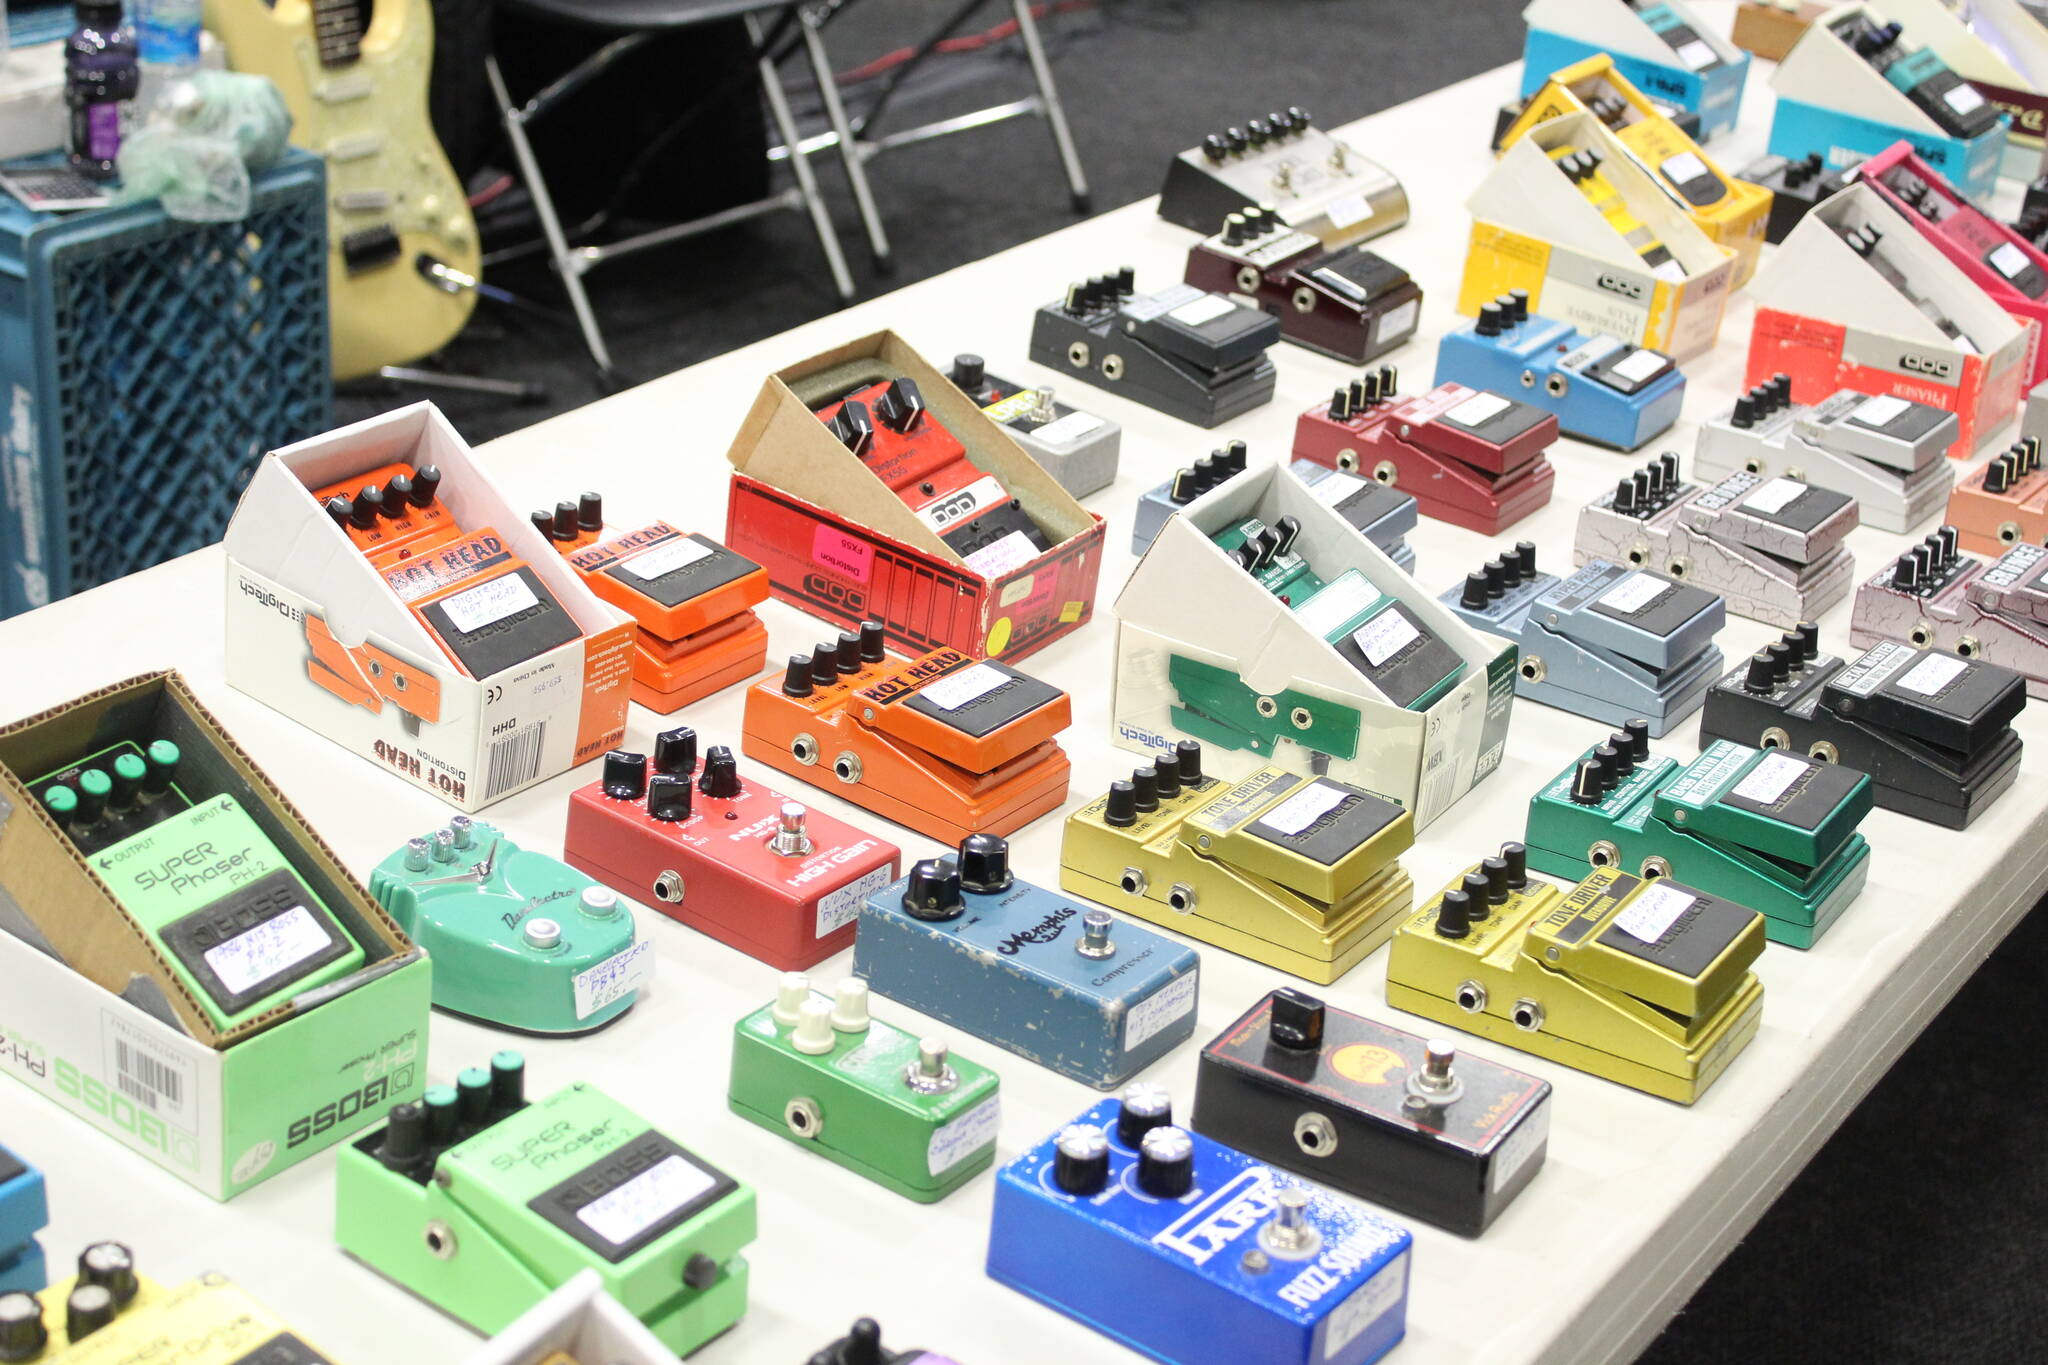 Effects pedals were also on sale at the guitar show, which help give guitarists rich tones and genre-specific sounds when playing music. Photo by Bailey Jo Josie/Sound Publishing